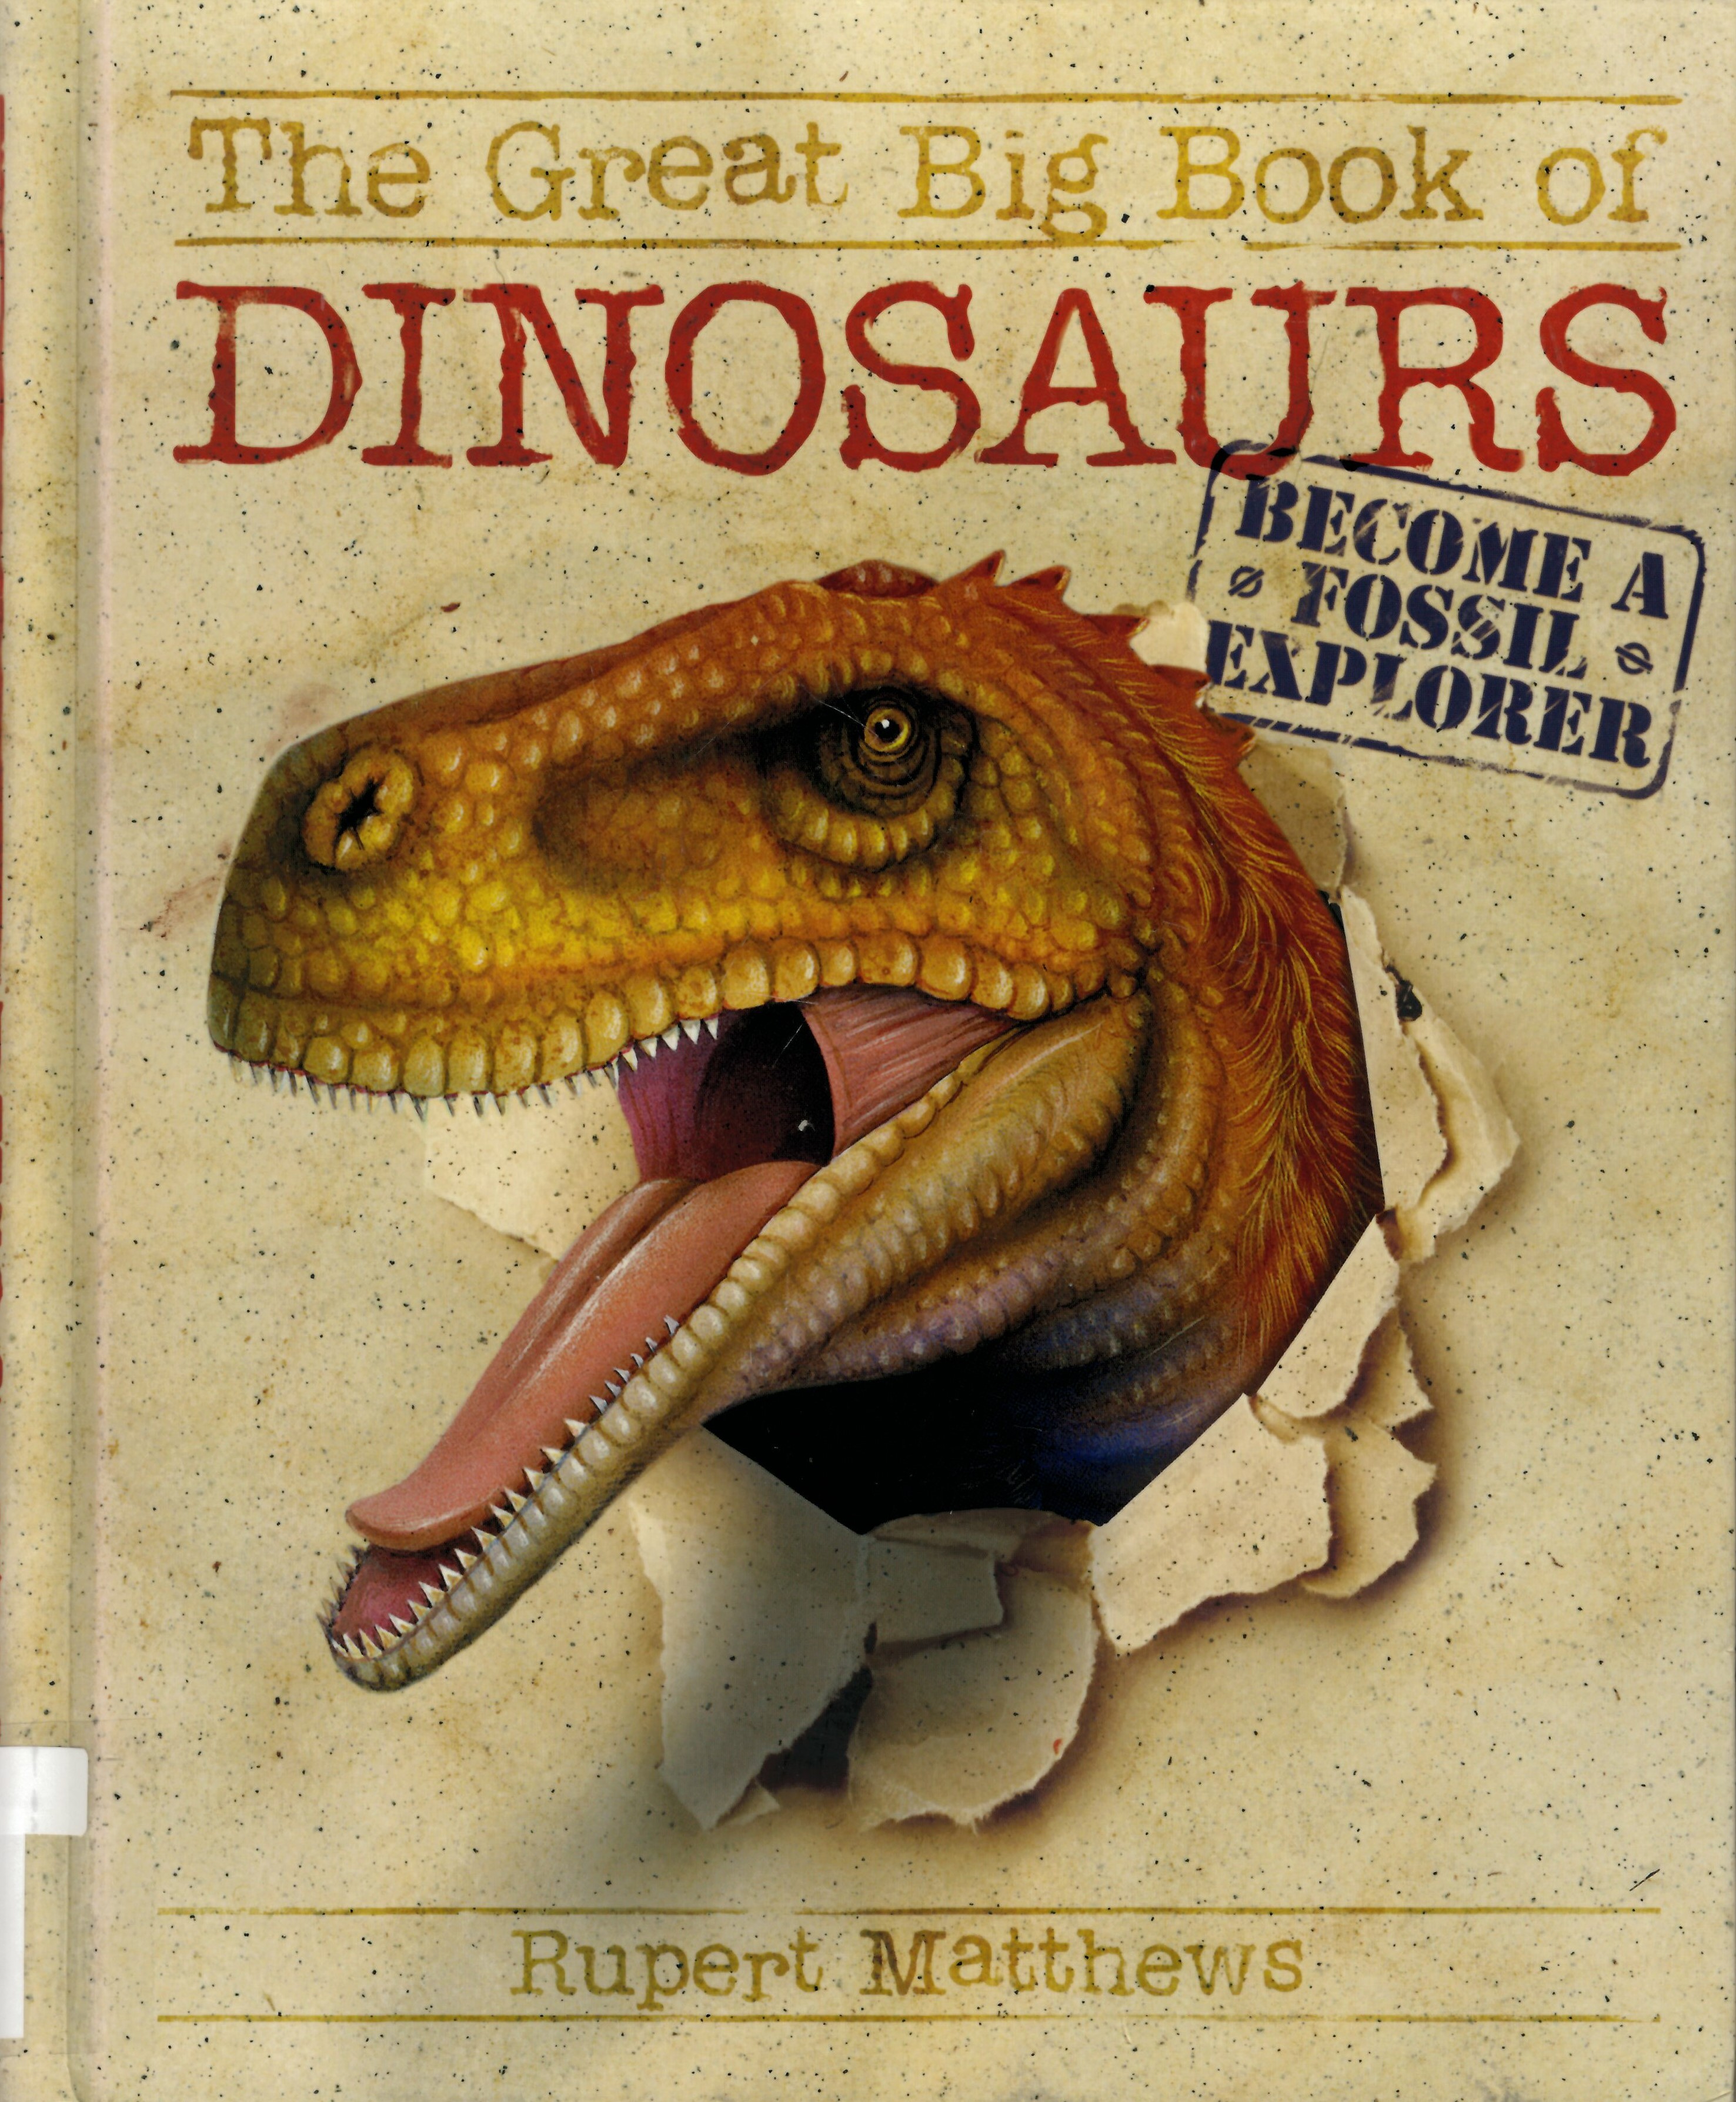 The great big book of dinosaurs : become a fossil explorer